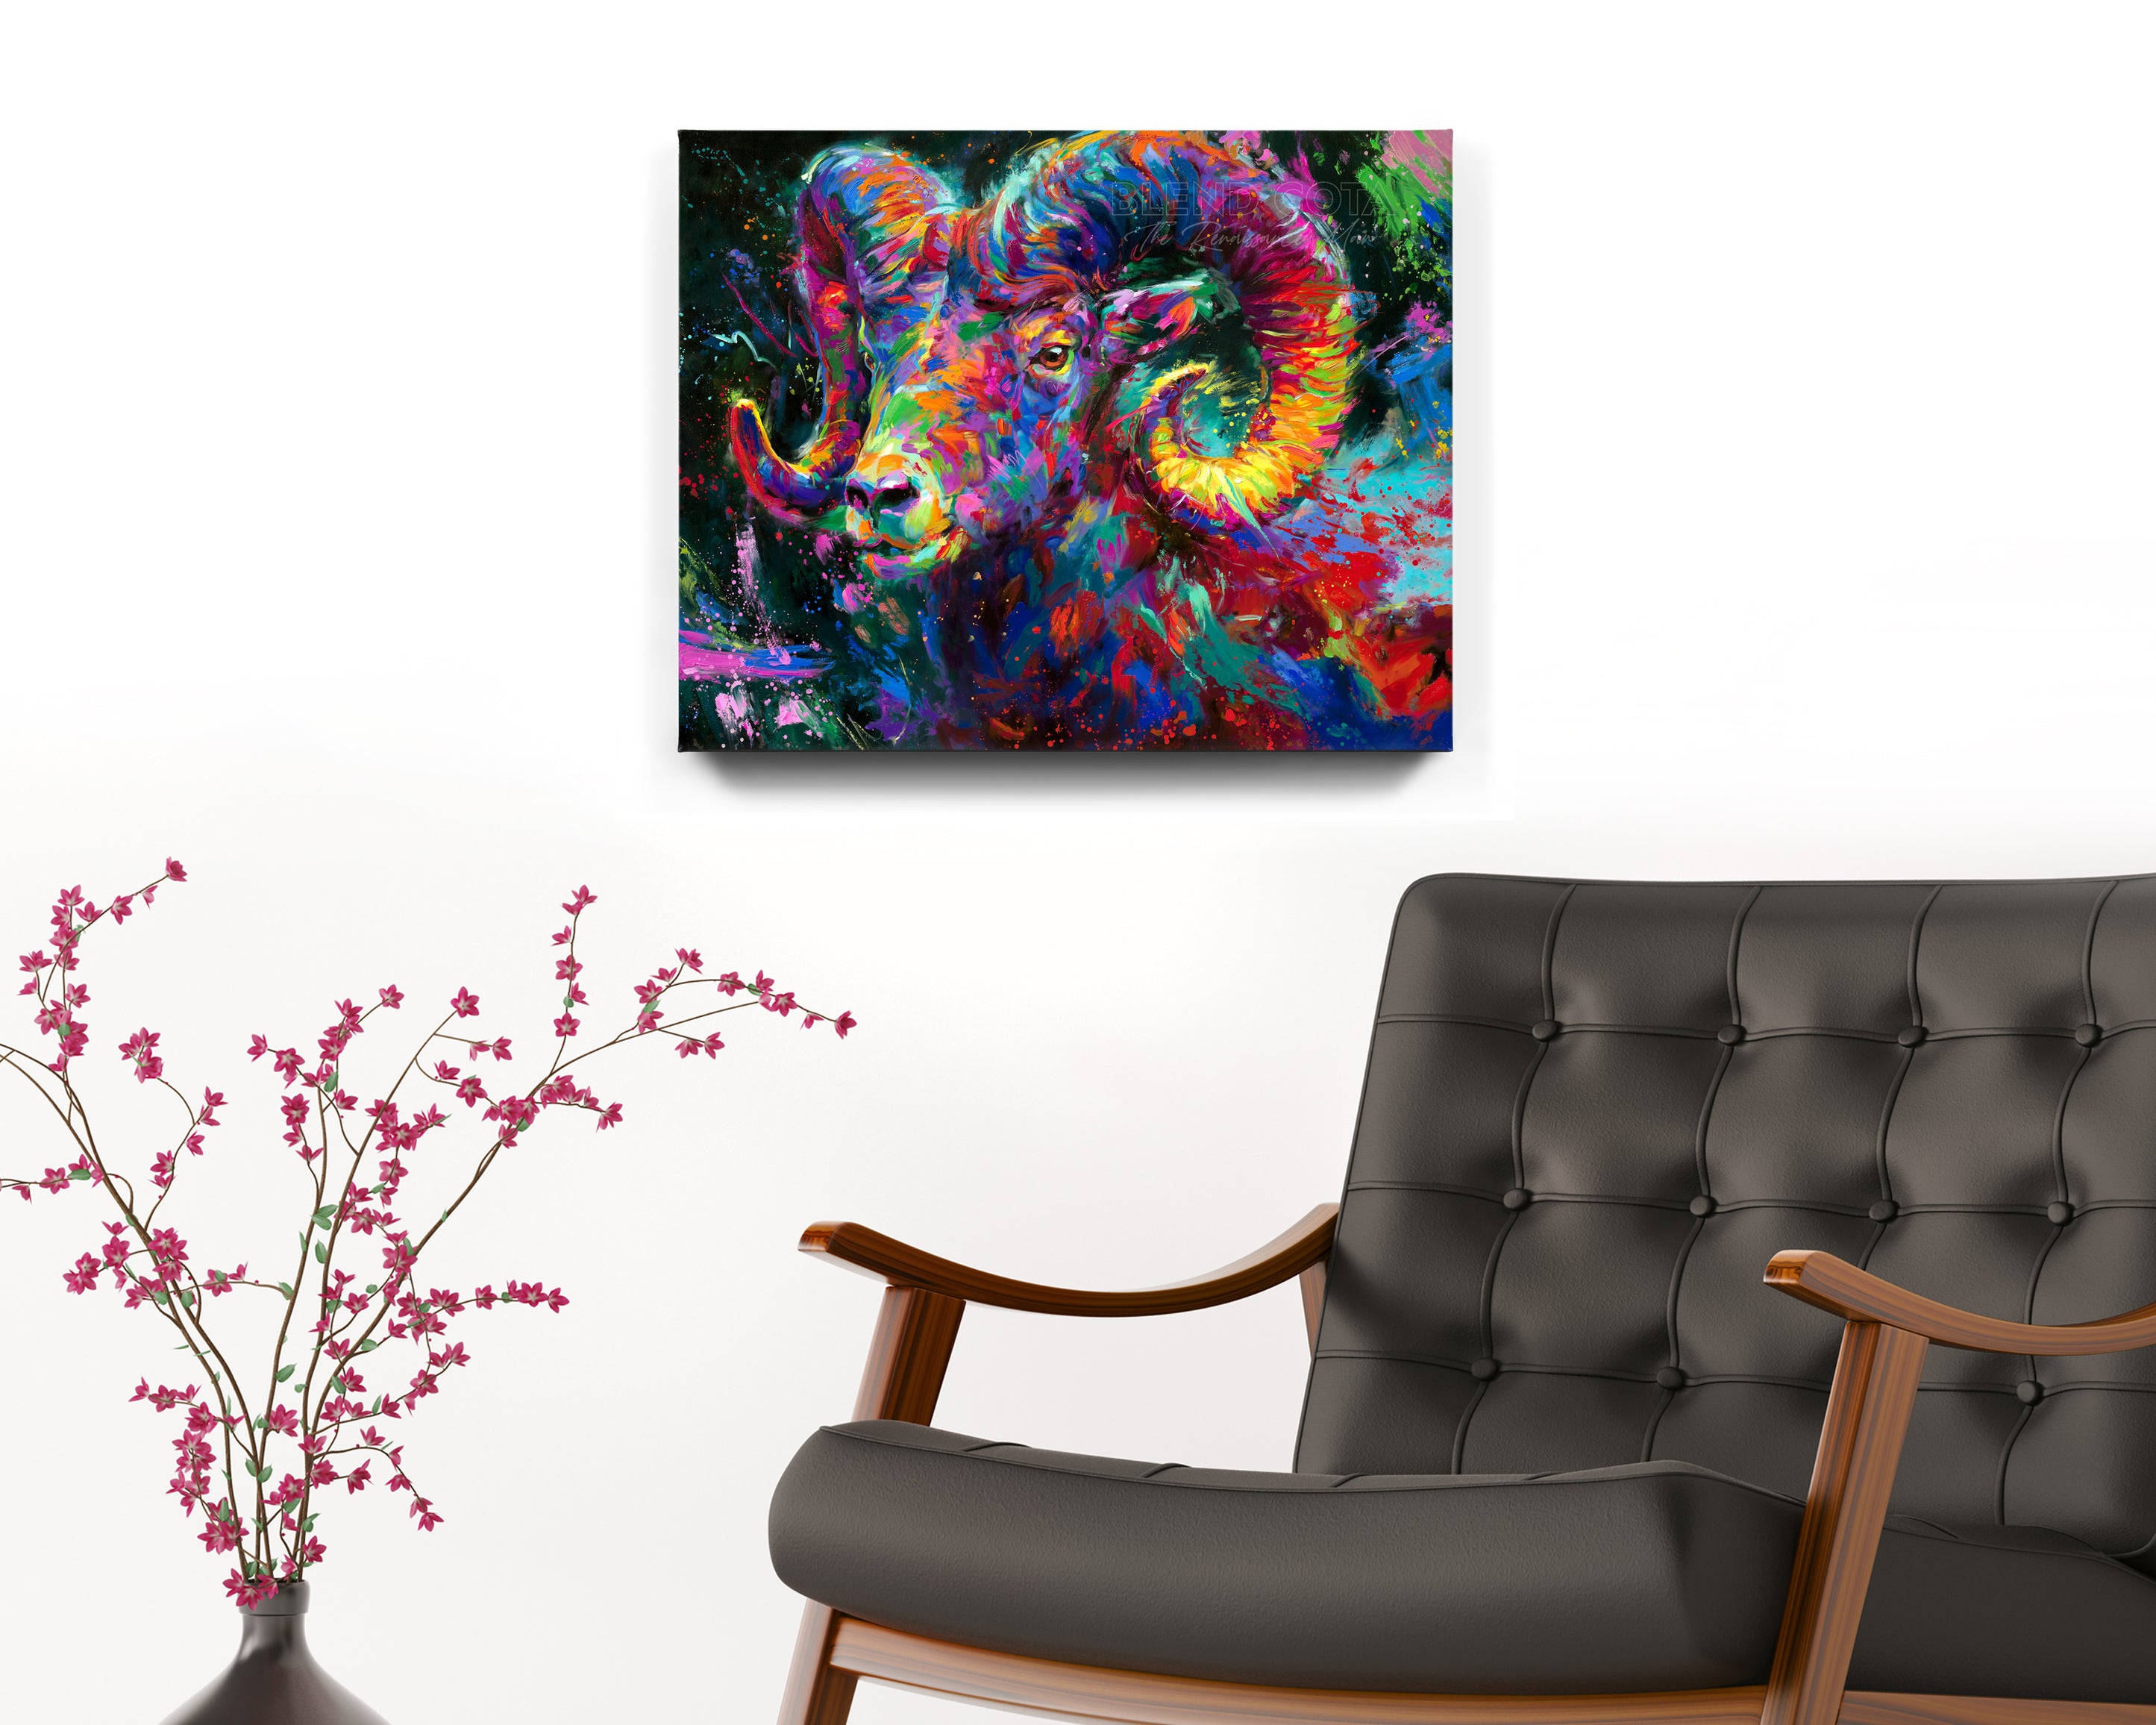 The Ram Spirit painted by Blend Cota Art Print on Cardstock from Blend Cota Studios with painting hanging on a white wall behind a black leather chair